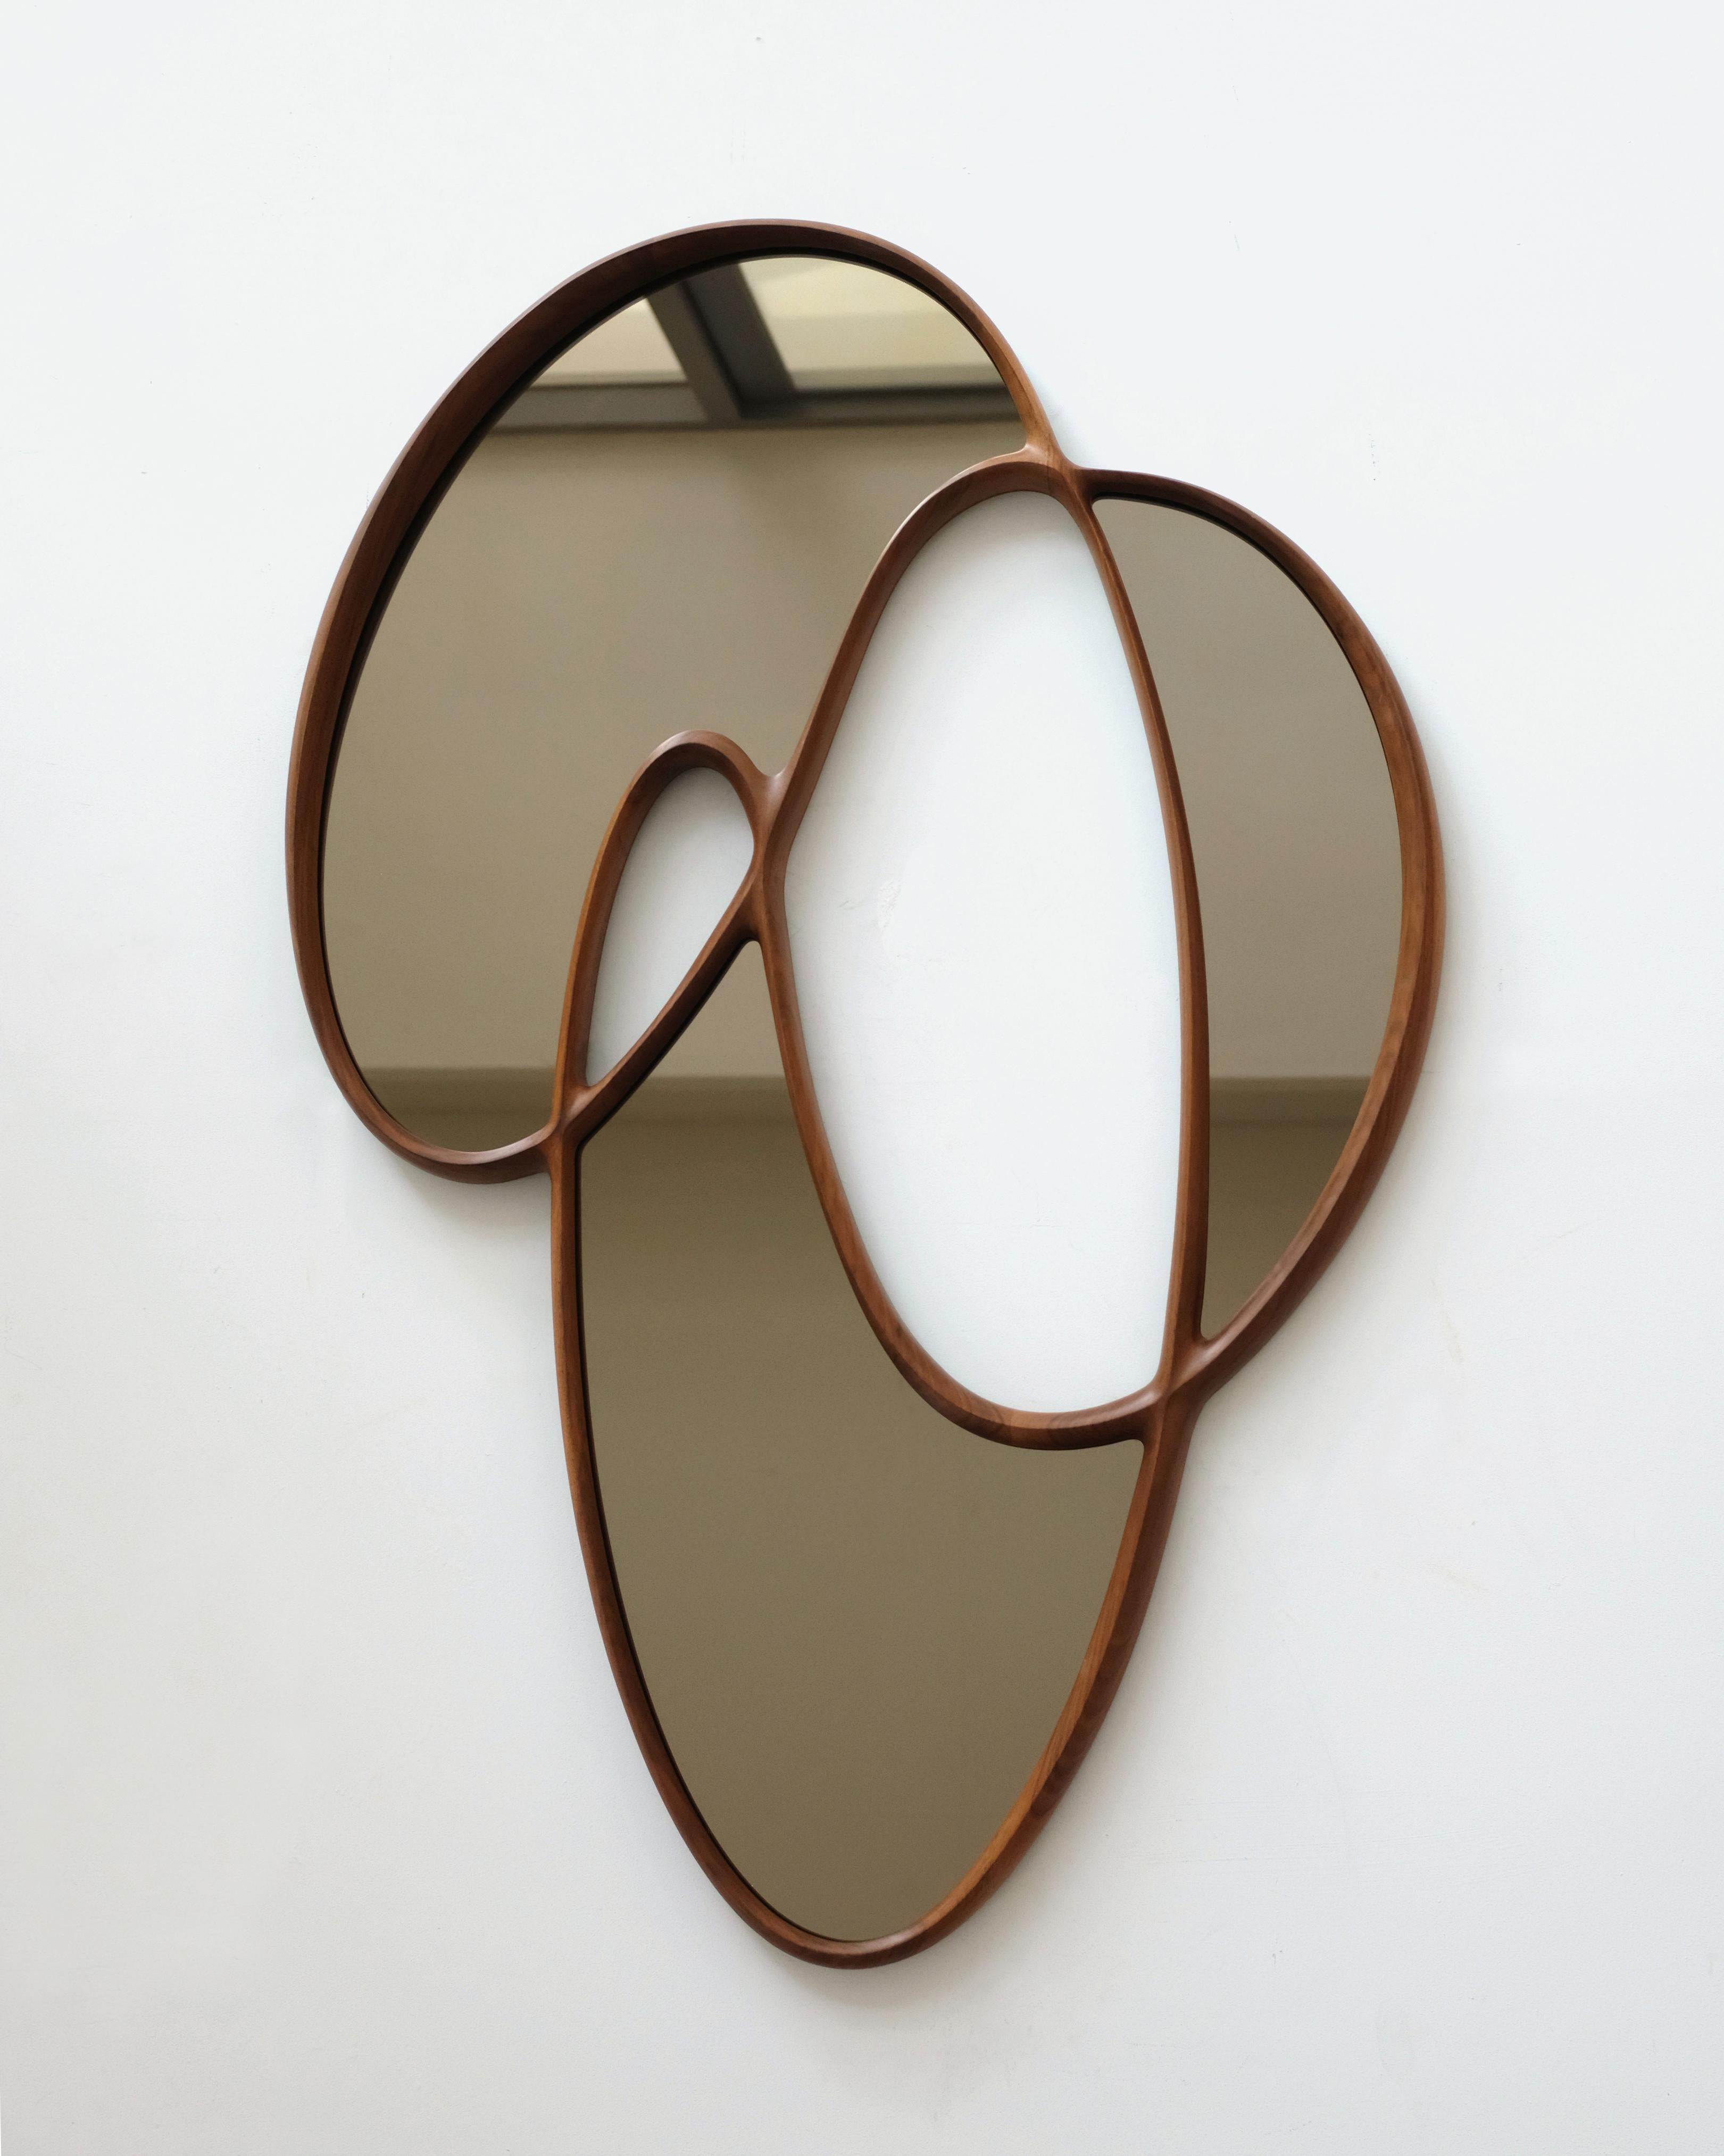 'Dynamic Mirror I' by Soo Joo is a statement wooden wall mirror with a unique and timeless asymmetric form. It hangs flush to the wall with custom-made steel French cleats, and can be hung horizontally or vertically.

Dynamic Mirror I is a novel